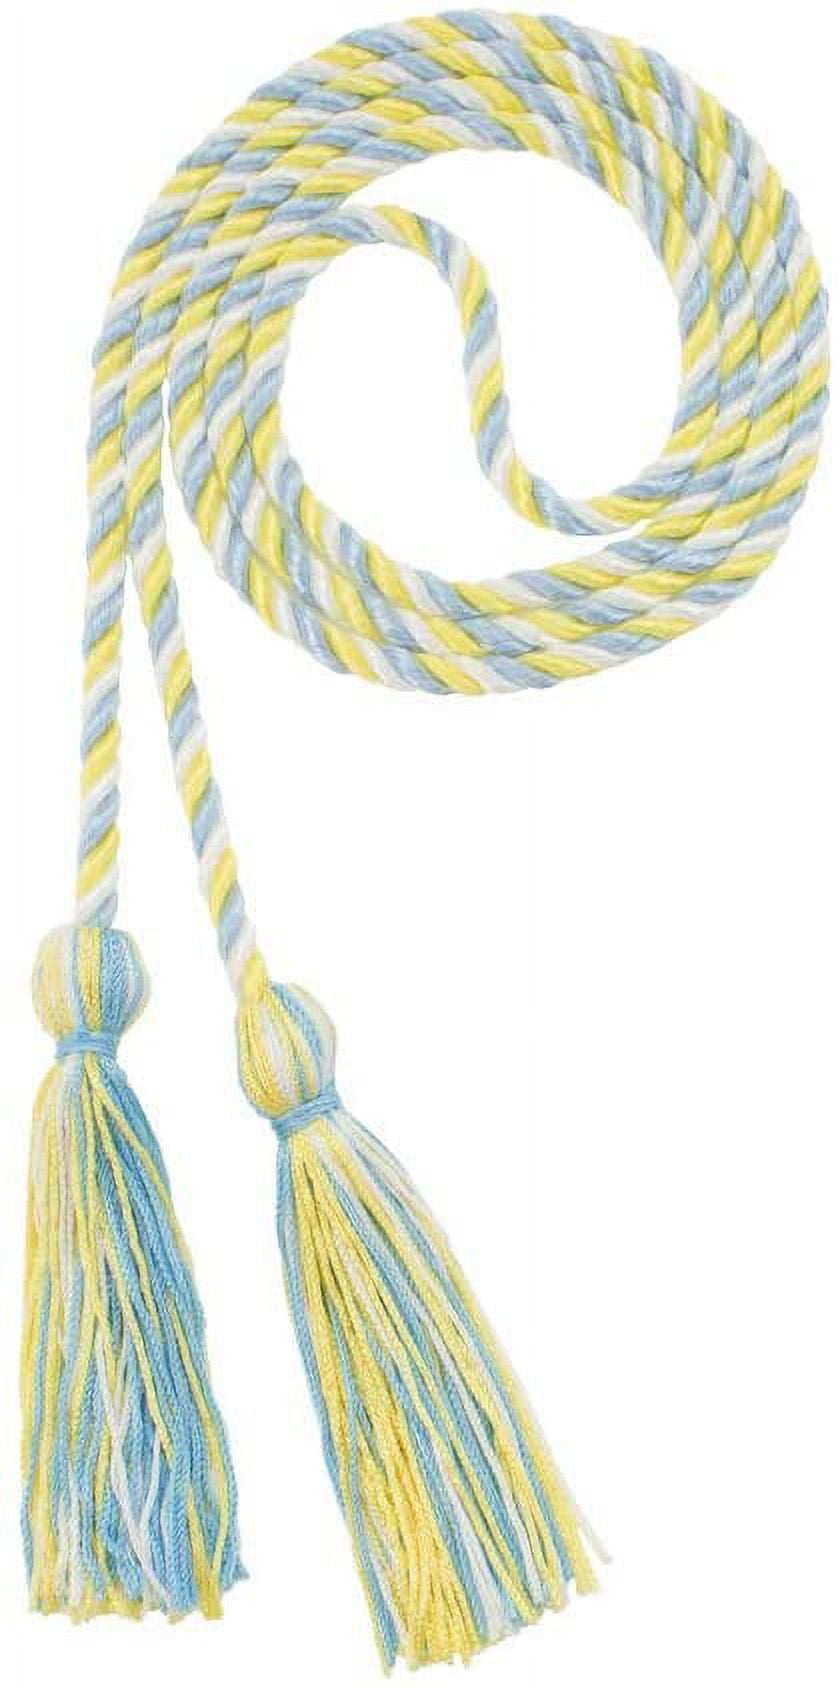 Graduation Honor Cord - LT BLUE / LEMON / WHITE - Every School Color  Available - Made in USA - By Tassel Depot 